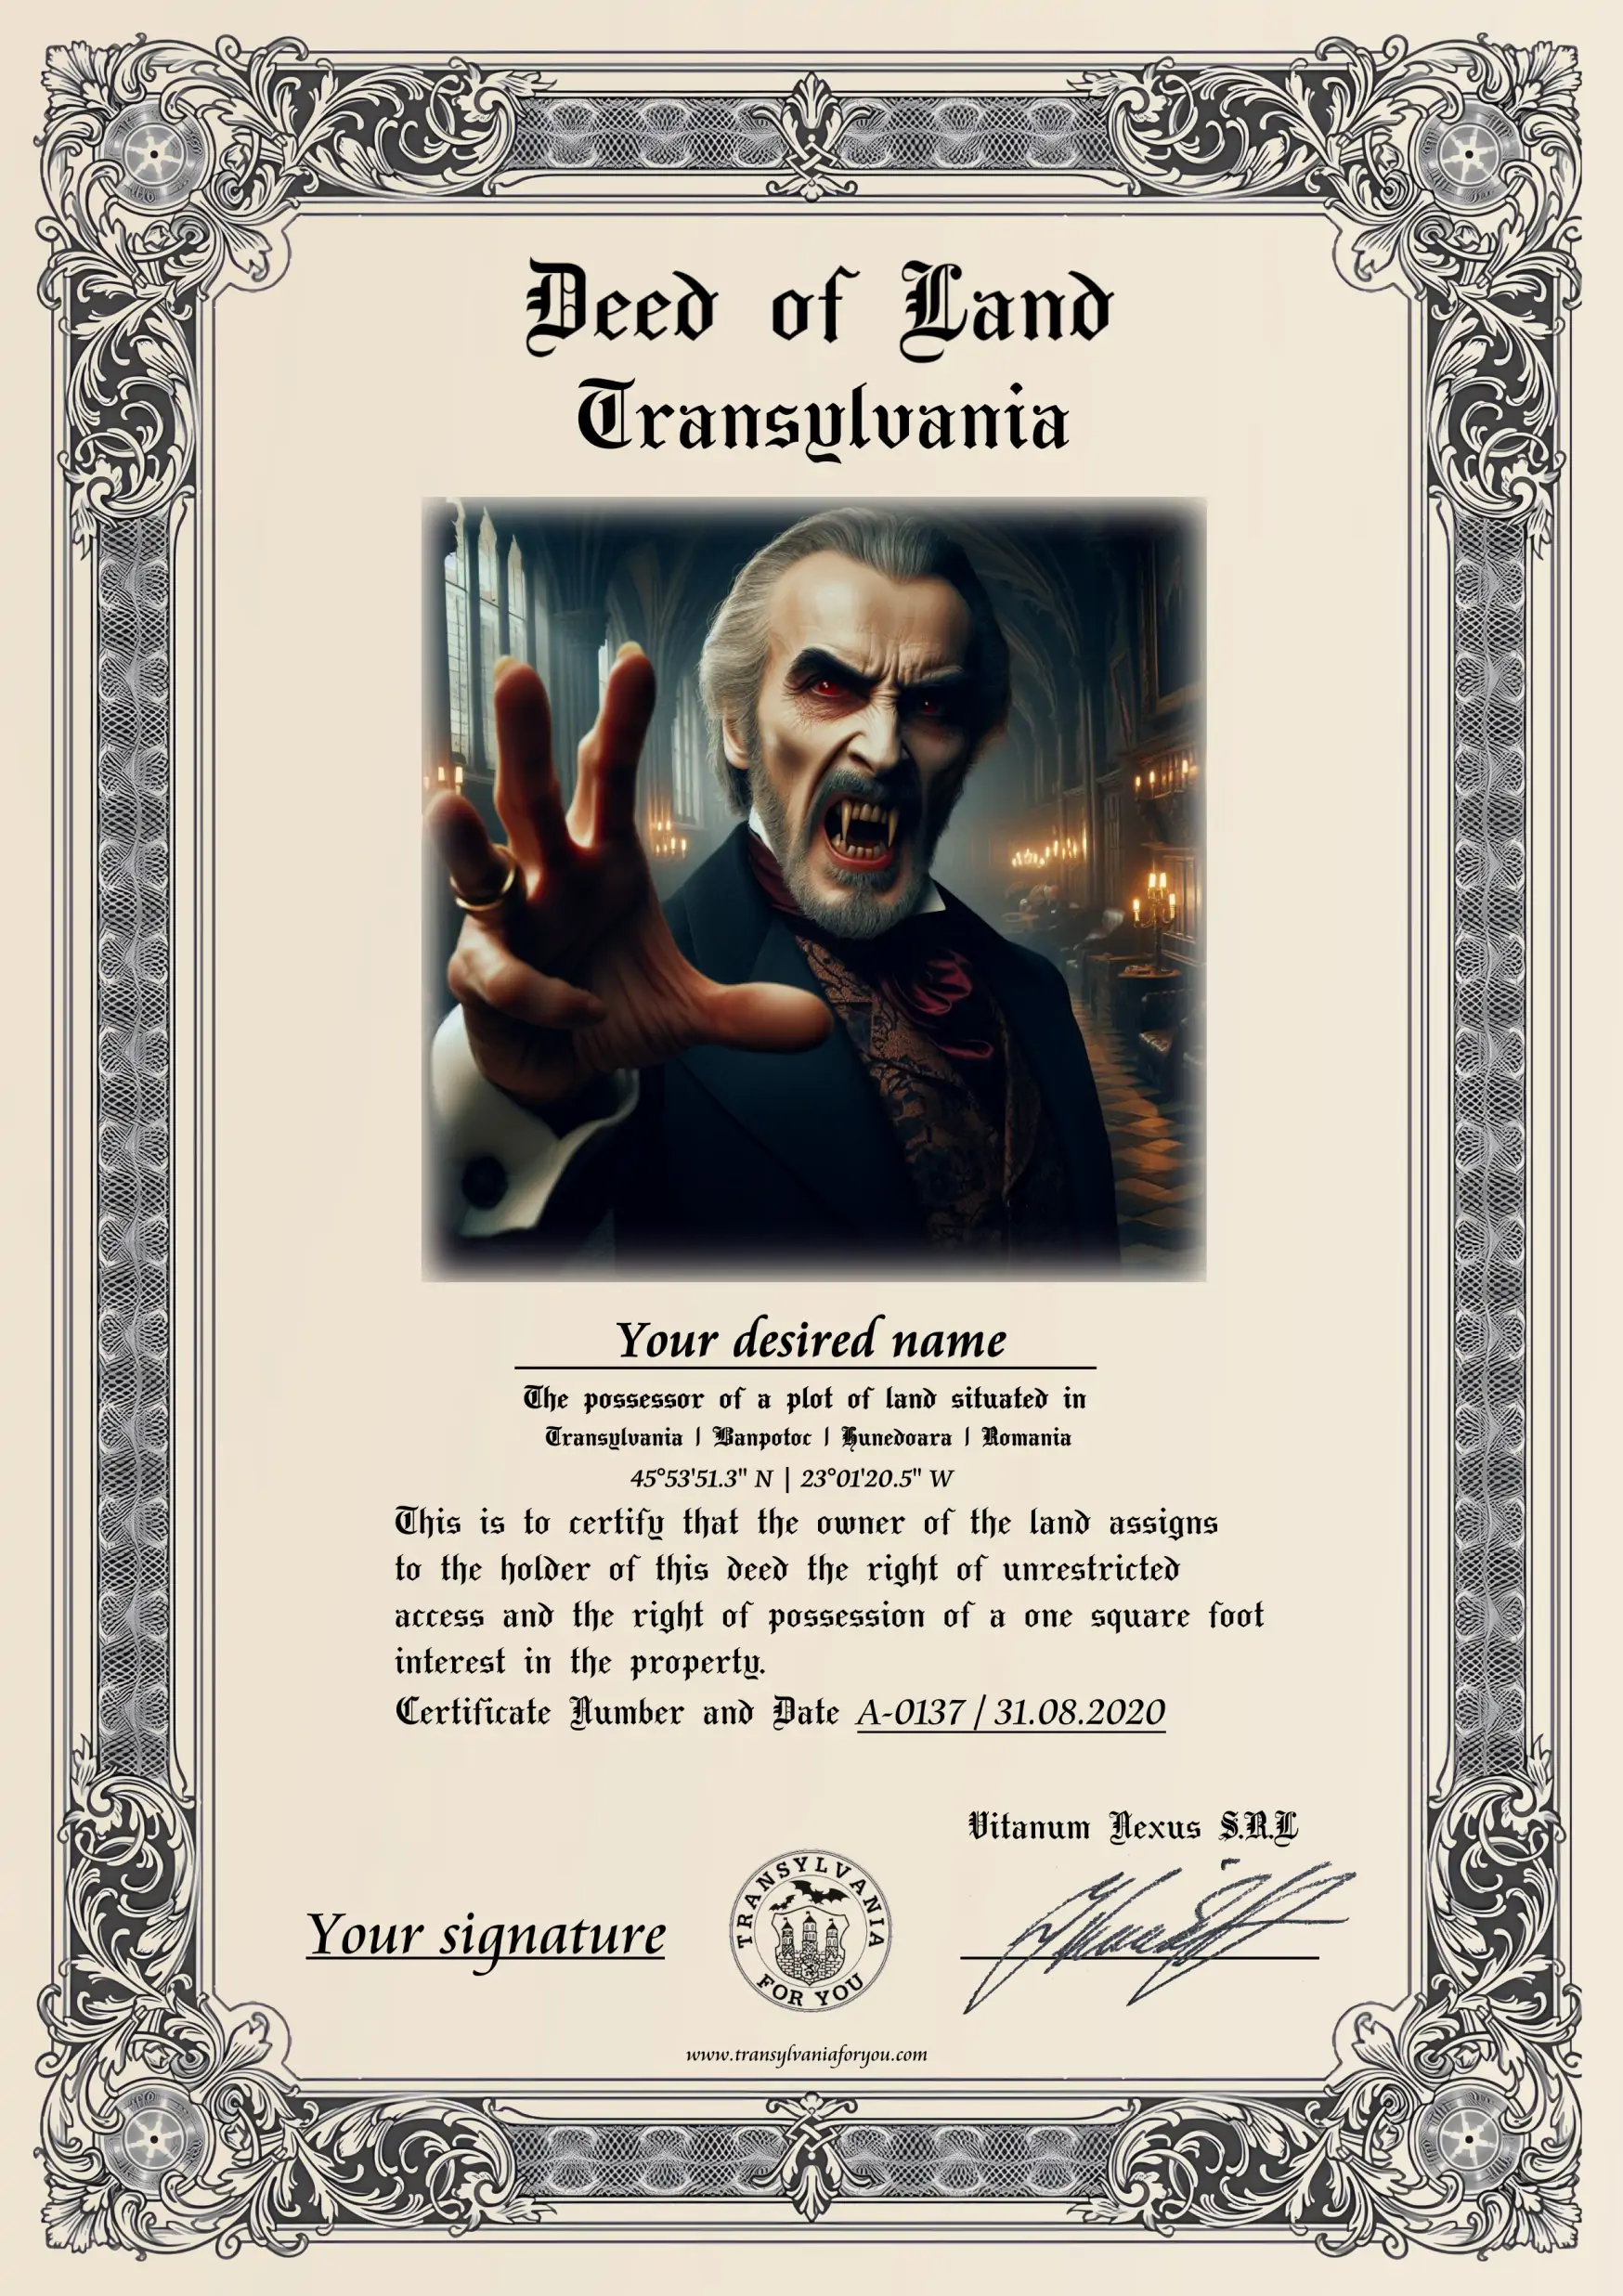 Image on the deed: Graf Dracula, Christopher Lee